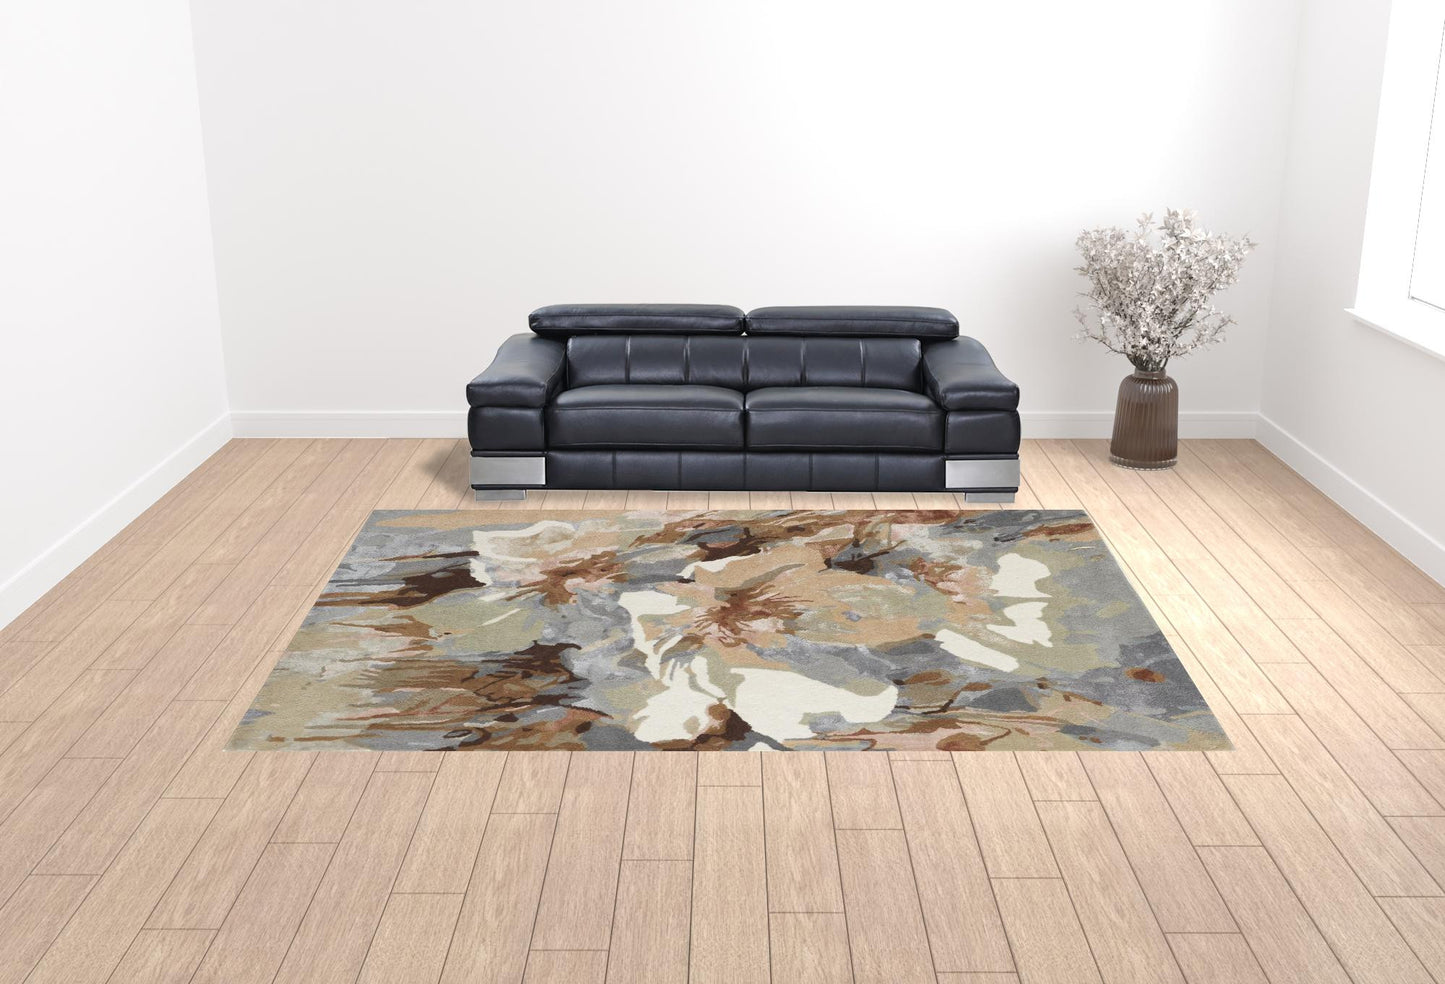 4' x 6' Tan and Gray Wool Floral Hand Tufted Area Rug